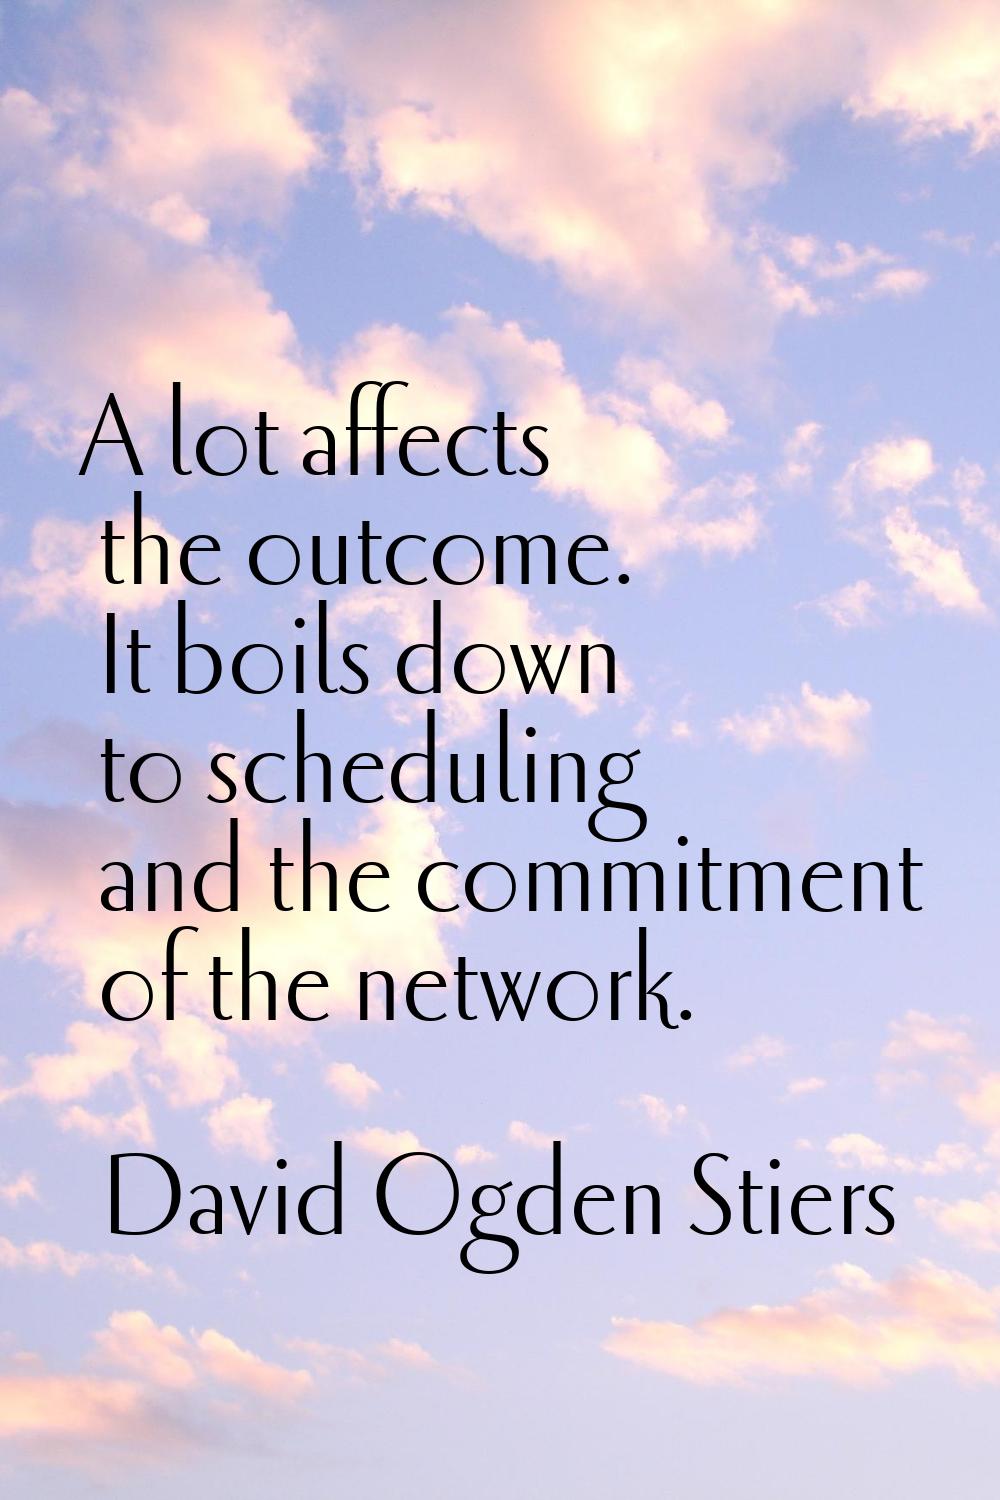 A lot affects the outcome. It boils down to scheduling and the commitment of the network.